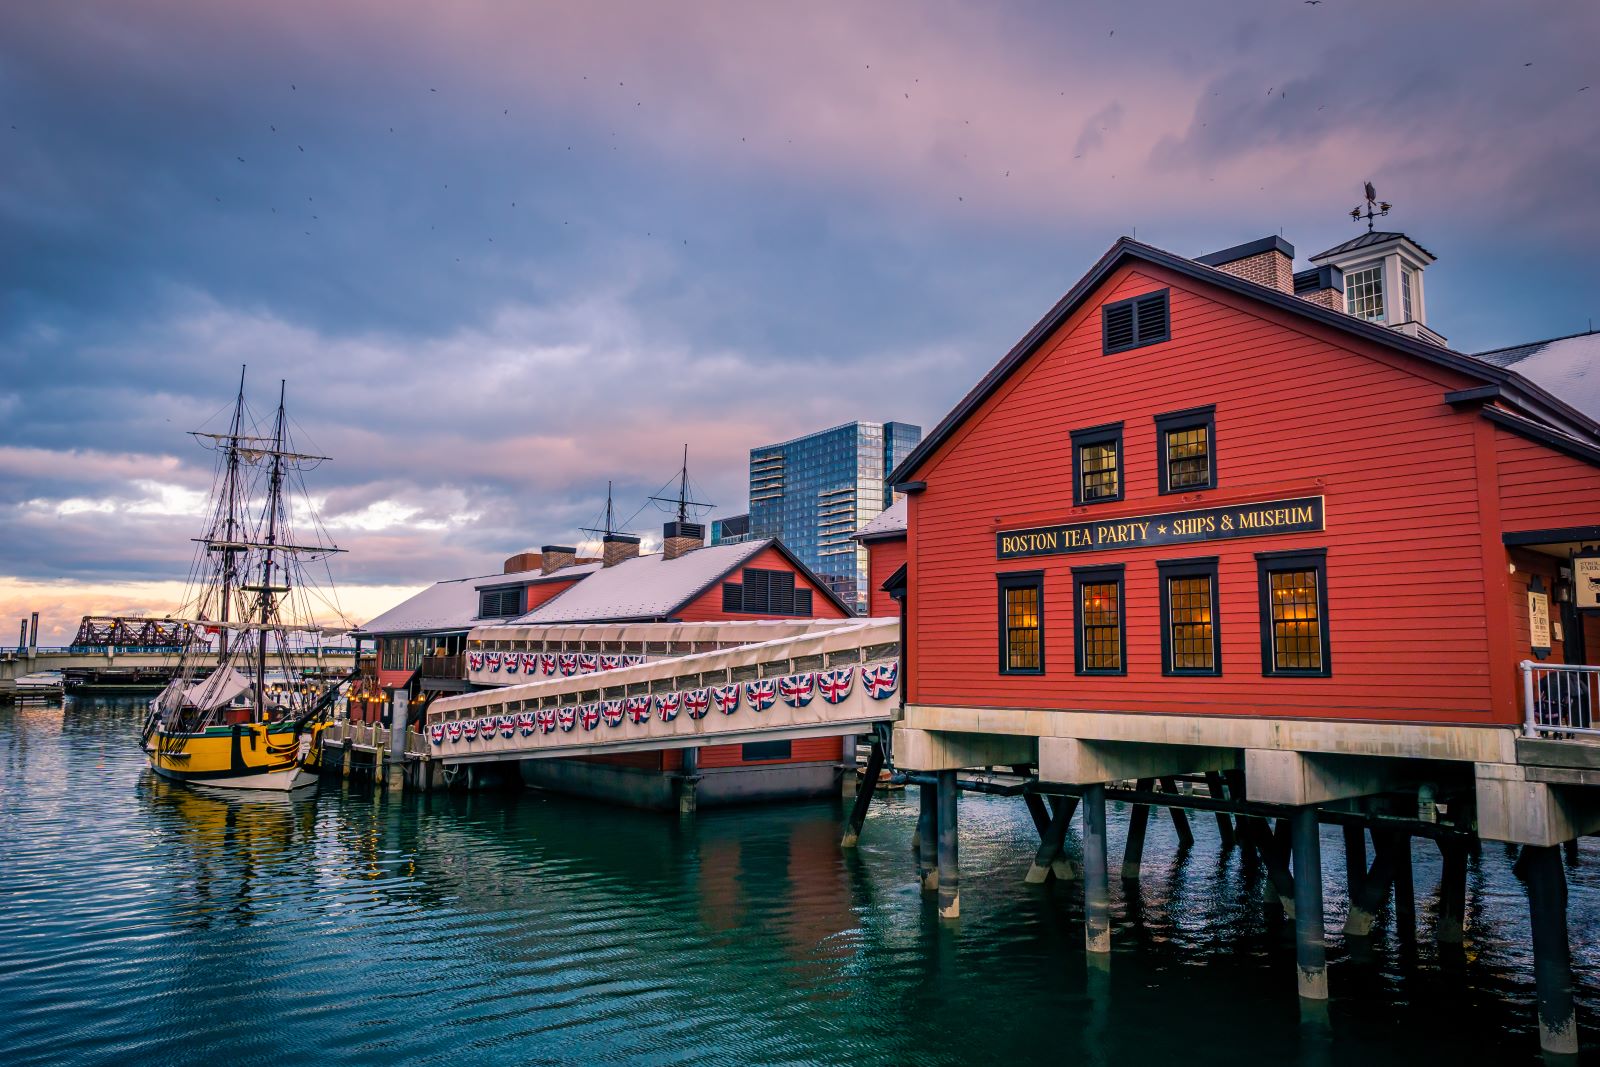 <p class="wp-caption-text">Image Credit: Shutterstock / LnP images</p>  <p>Relive one of America’s most iconic protests at the Boston Tea Party Ships & Museum. Throw tea into the harbor and enjoy interactive exhibits.</p>